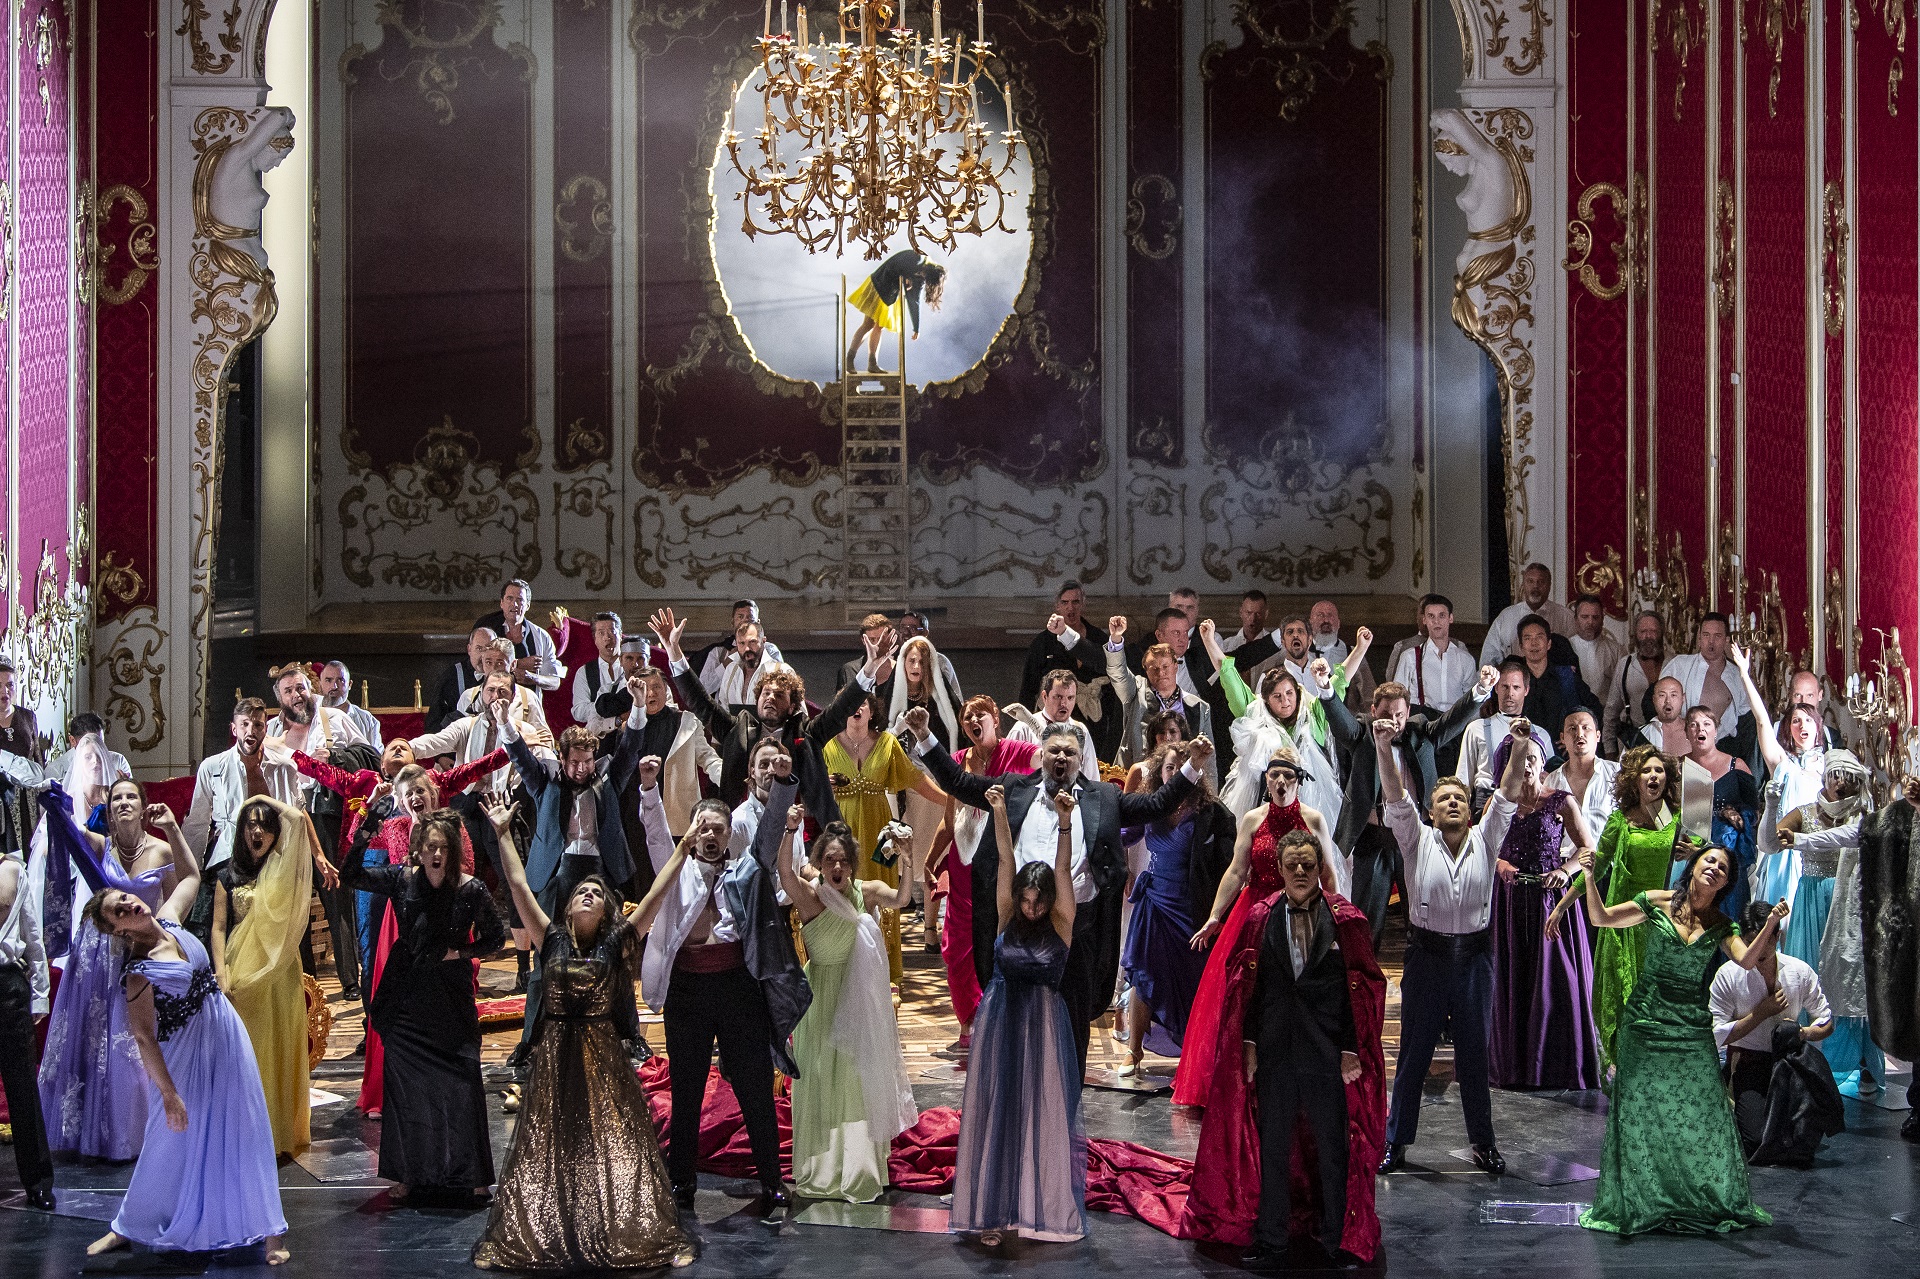 'War & Peace', by Prokofiev at The Hungarian State Opera